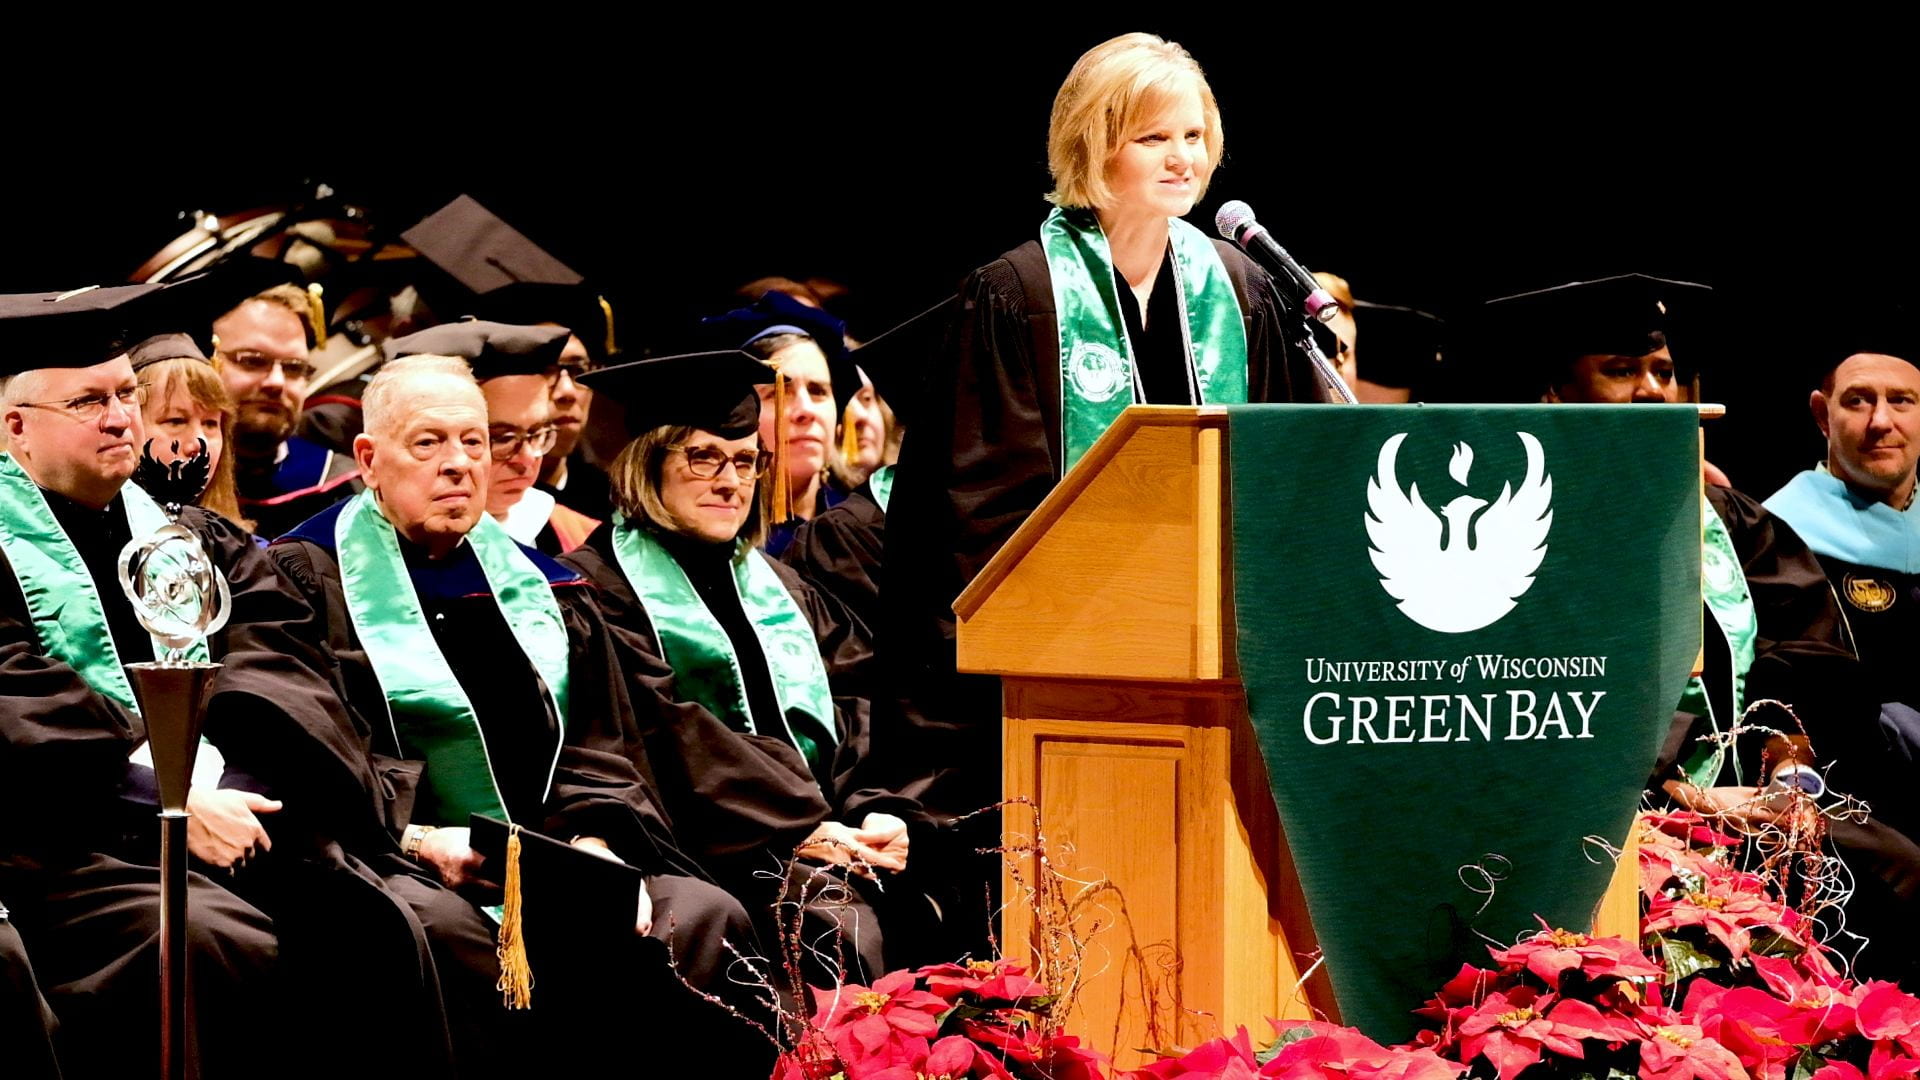 UW-Green Bay's Interim Chancellor Sheryl Van Gruensven gives the opening remarks at the winter 2019 Commencement ceremony at the UW-Green Bay Weidner Center.